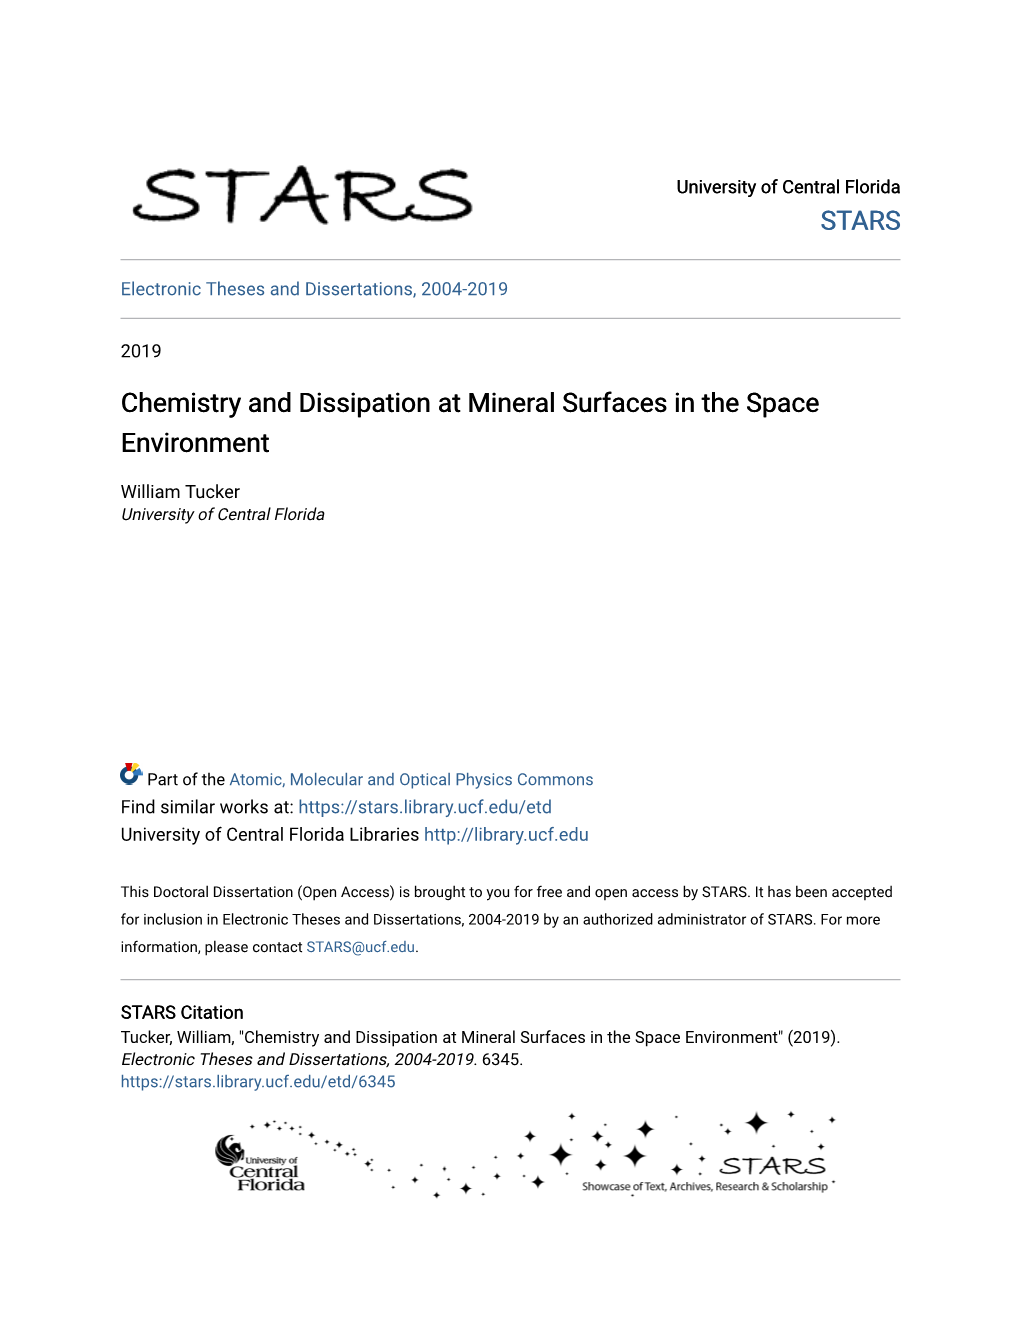 Chemistry and Dissipation at Mineral Surfaces in the Space Environment